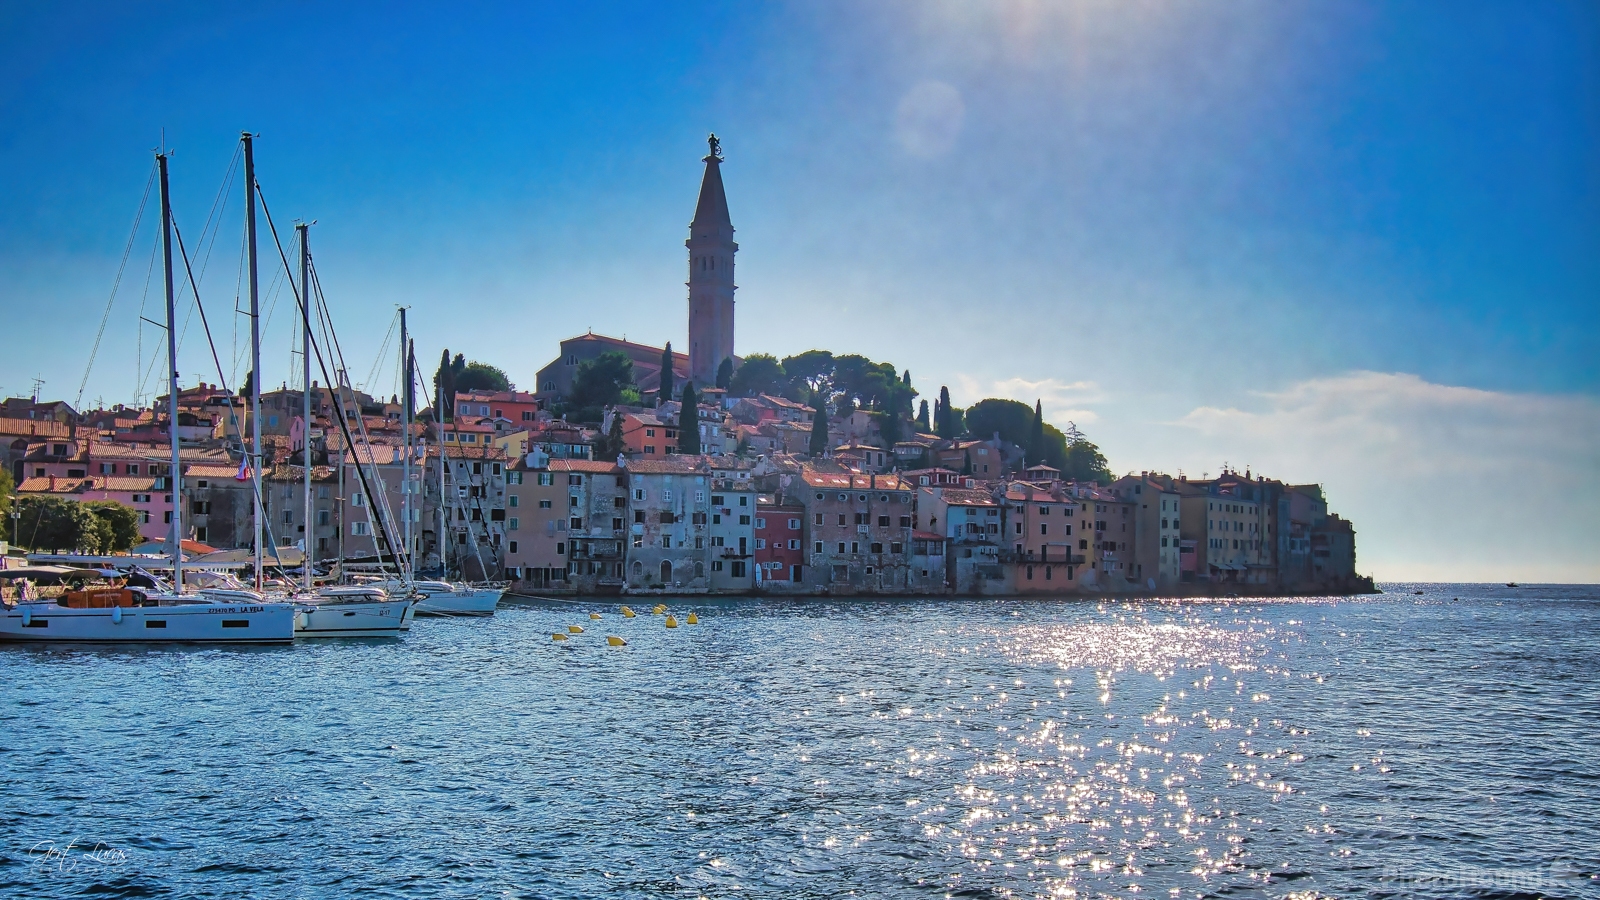 Image of Rovinj Classic View by Gert Lucas